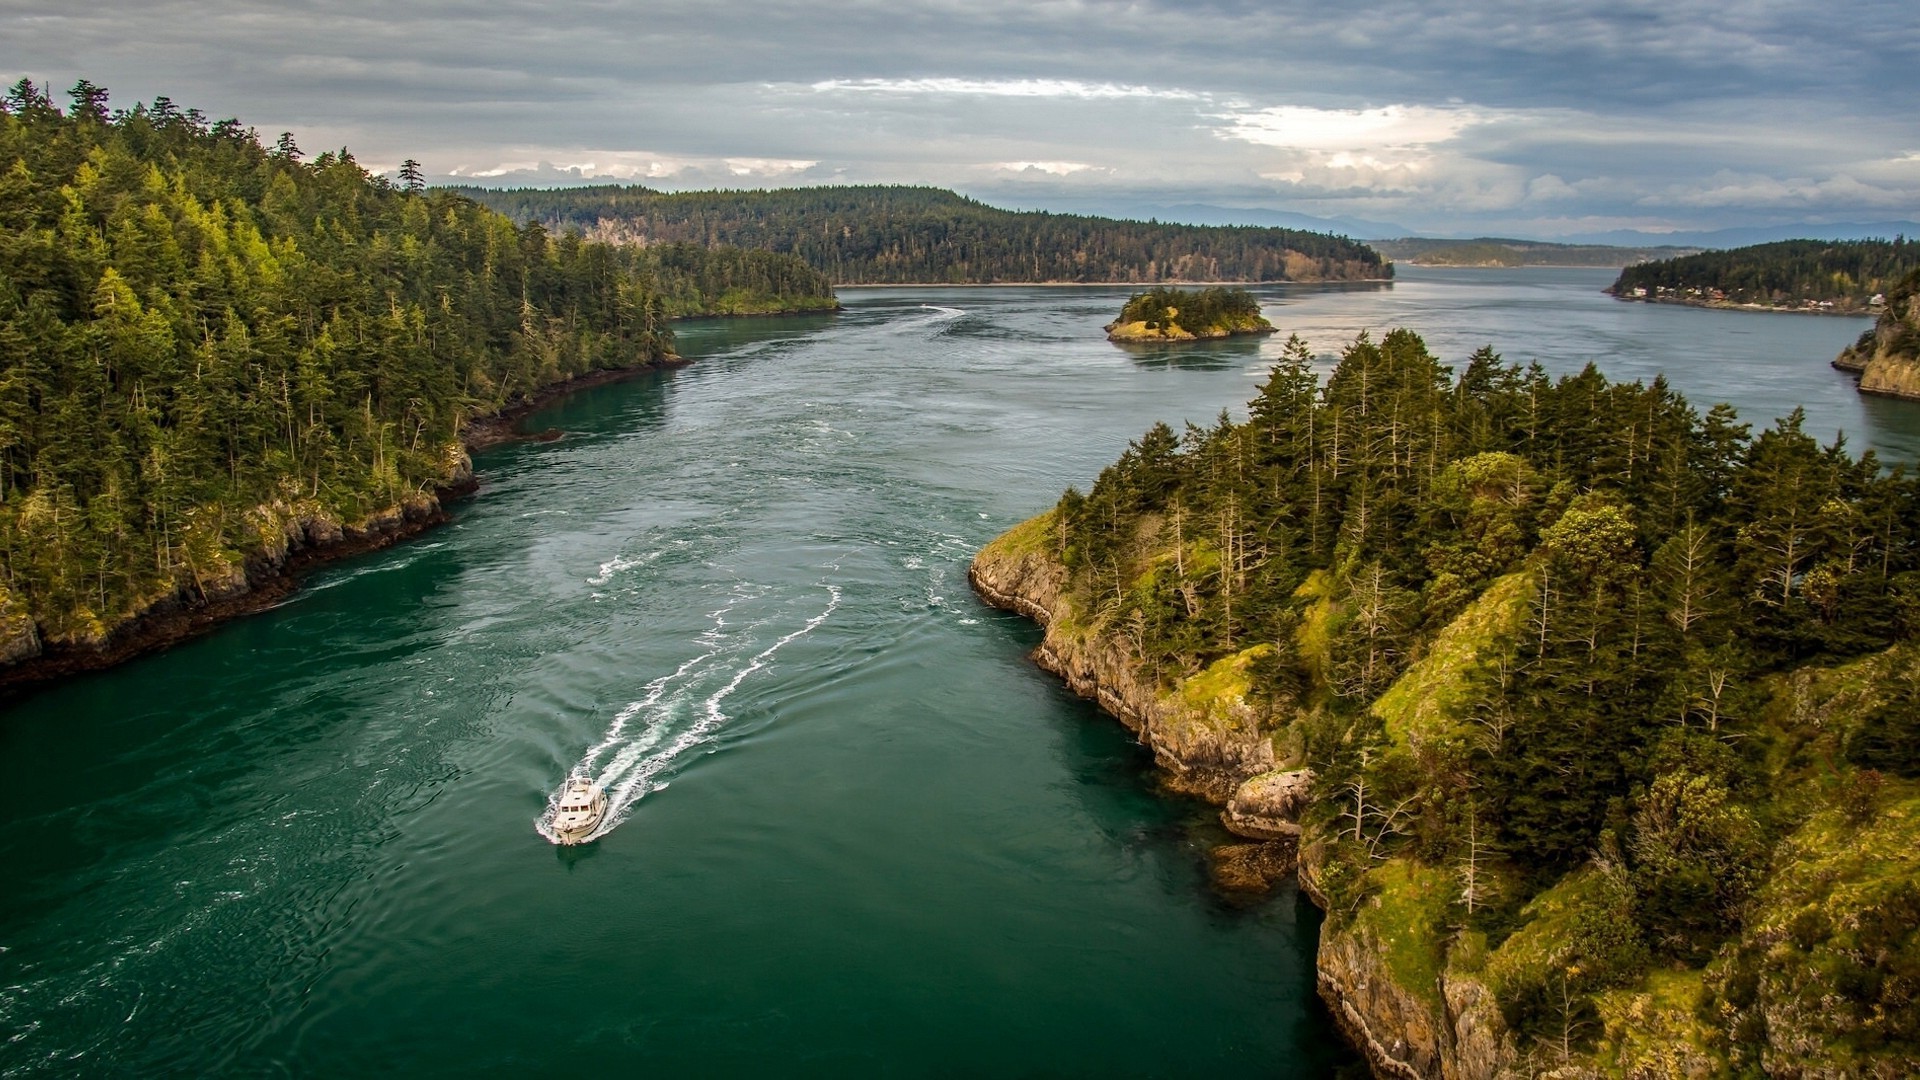 nature, Landscape, Ship, Boat, River, Trees, Pine Trees, Forest, Clouds, Birds Eye View, Rock, Island, Washington State, USA Wallpaper